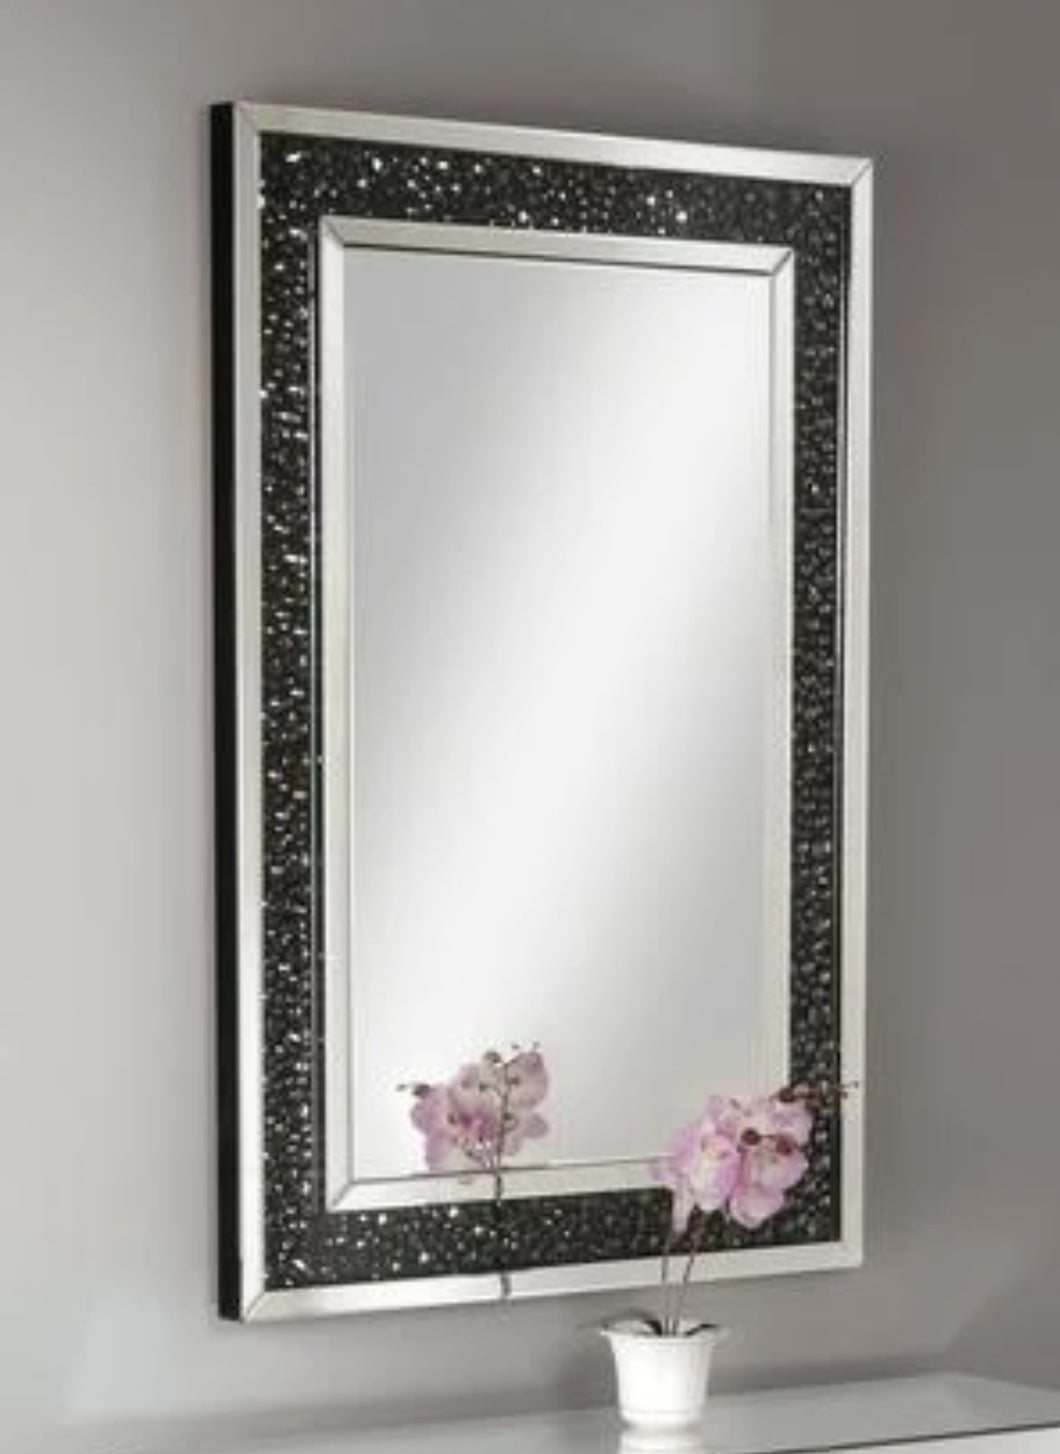 Noor Accent Mirror (Wall) - 97391 - Mirrored